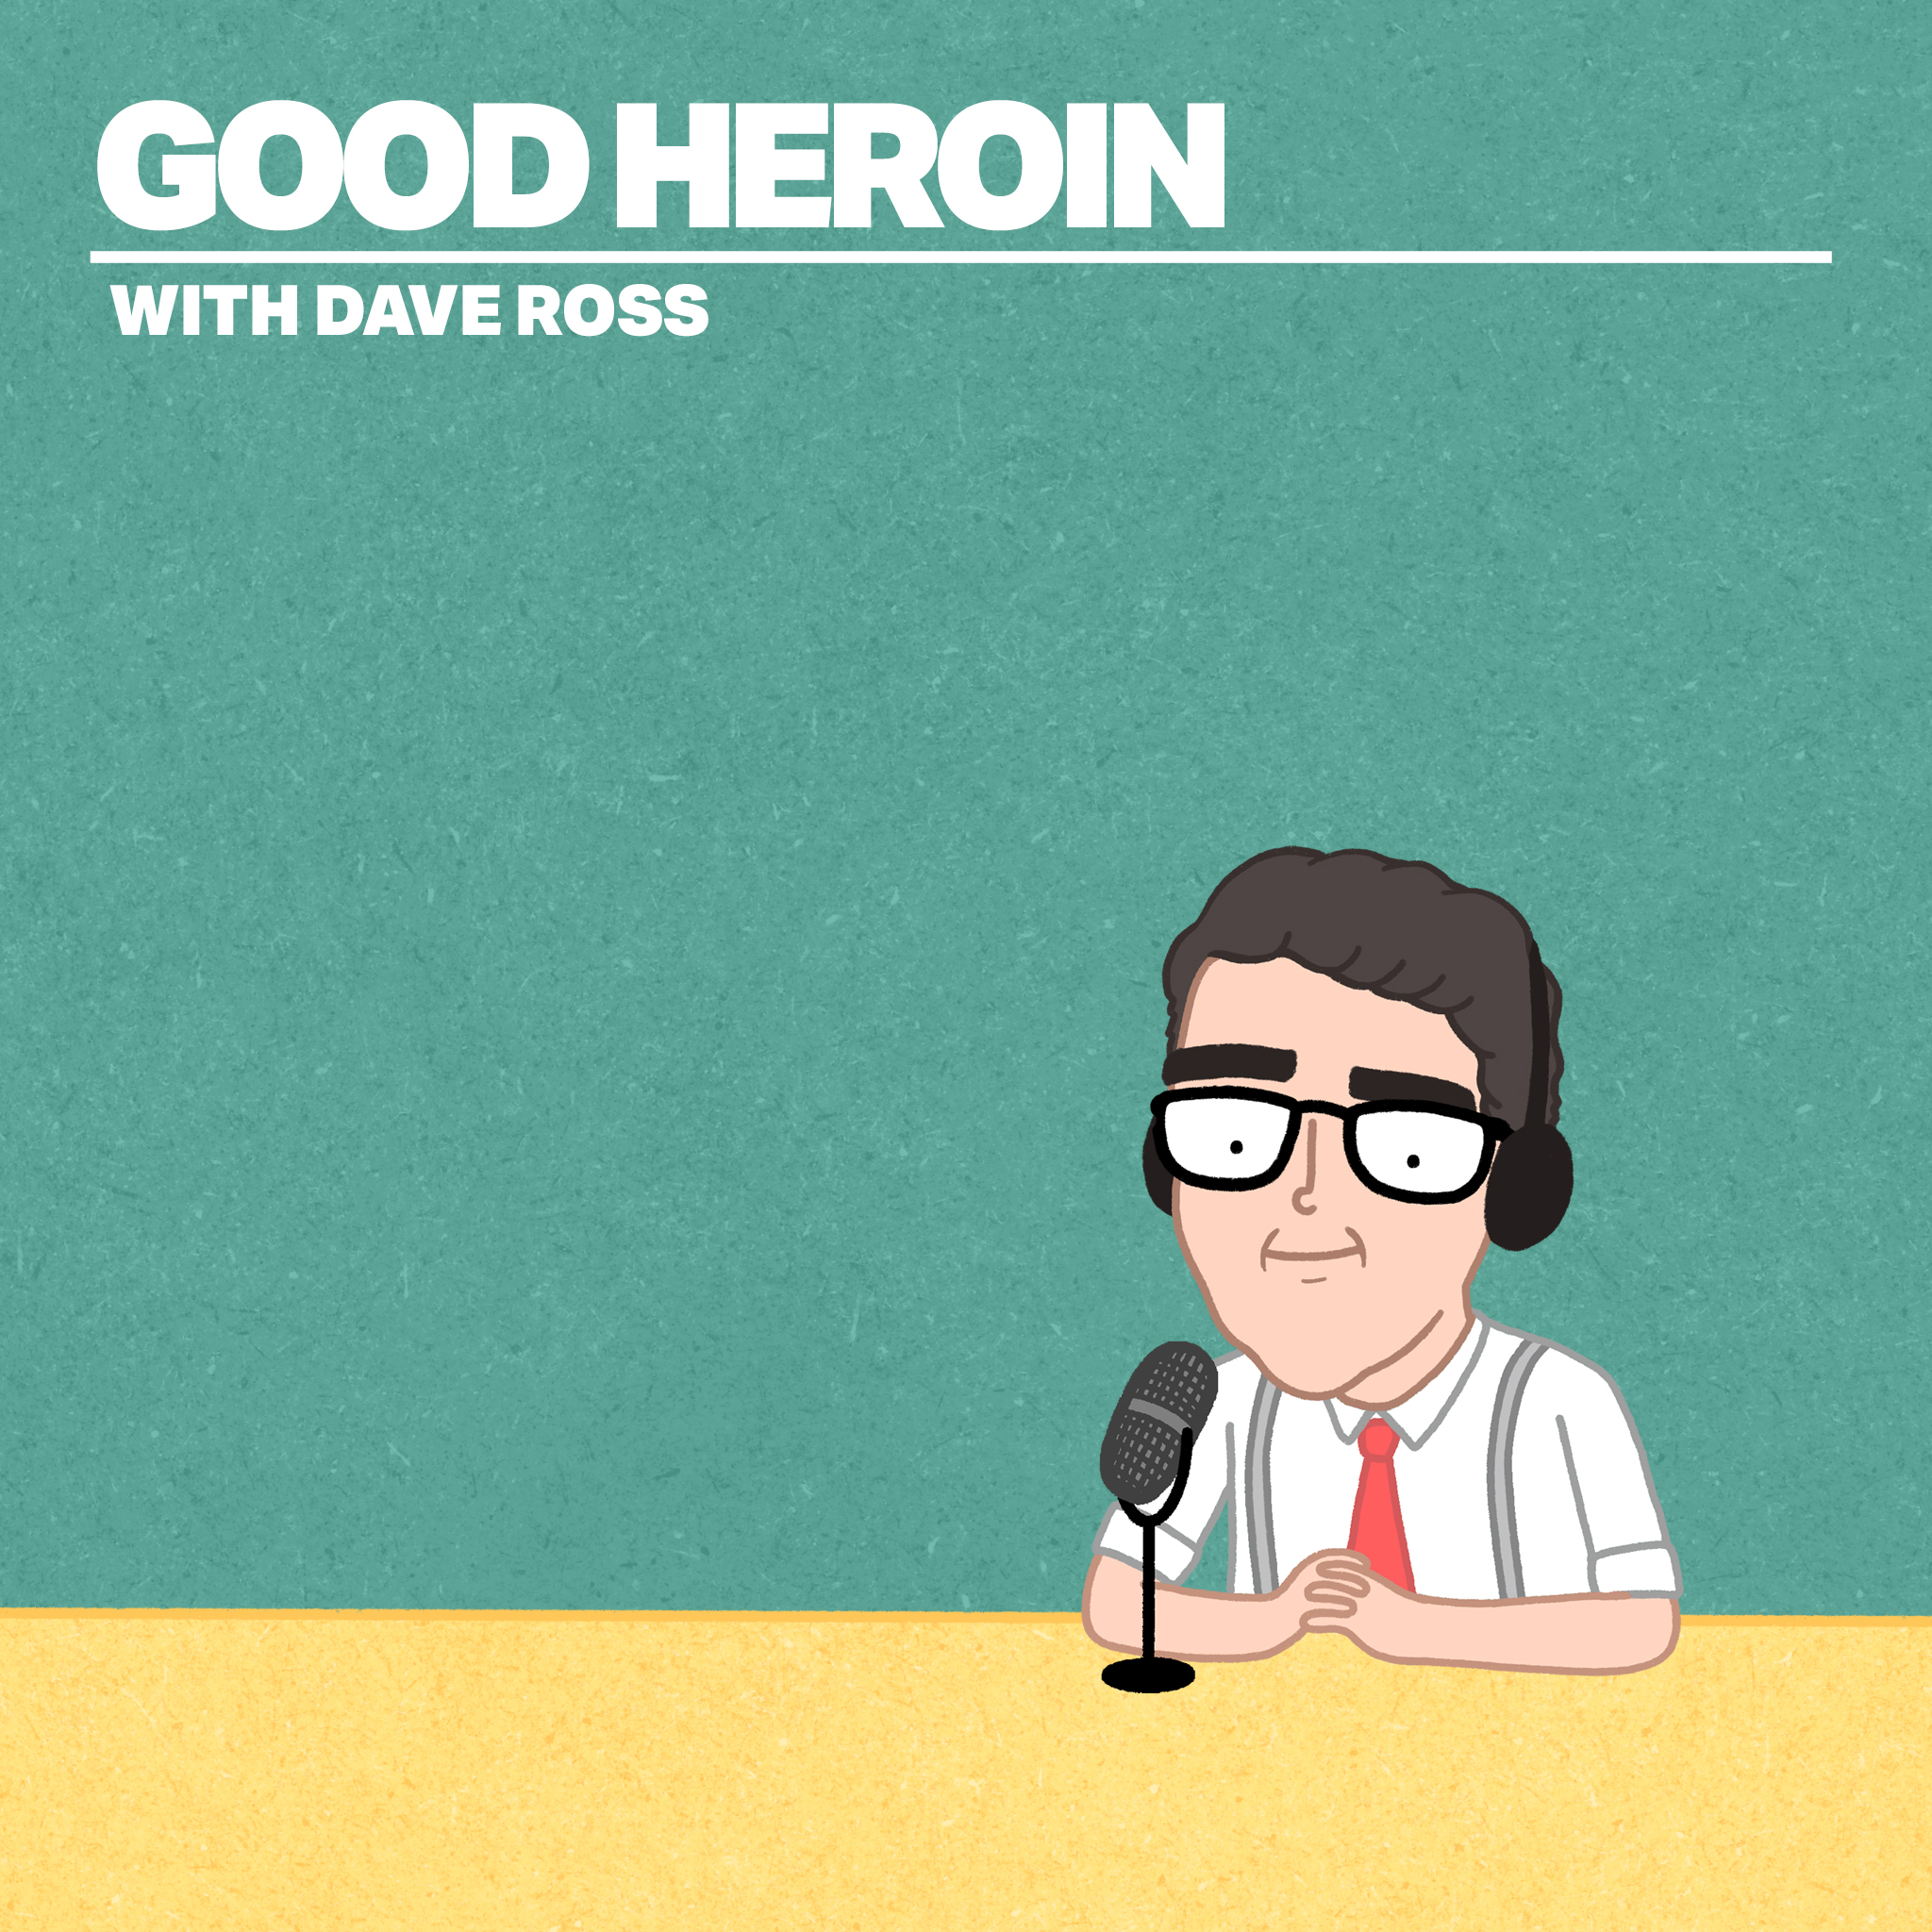 Good Heroin Podcast Cover - Square